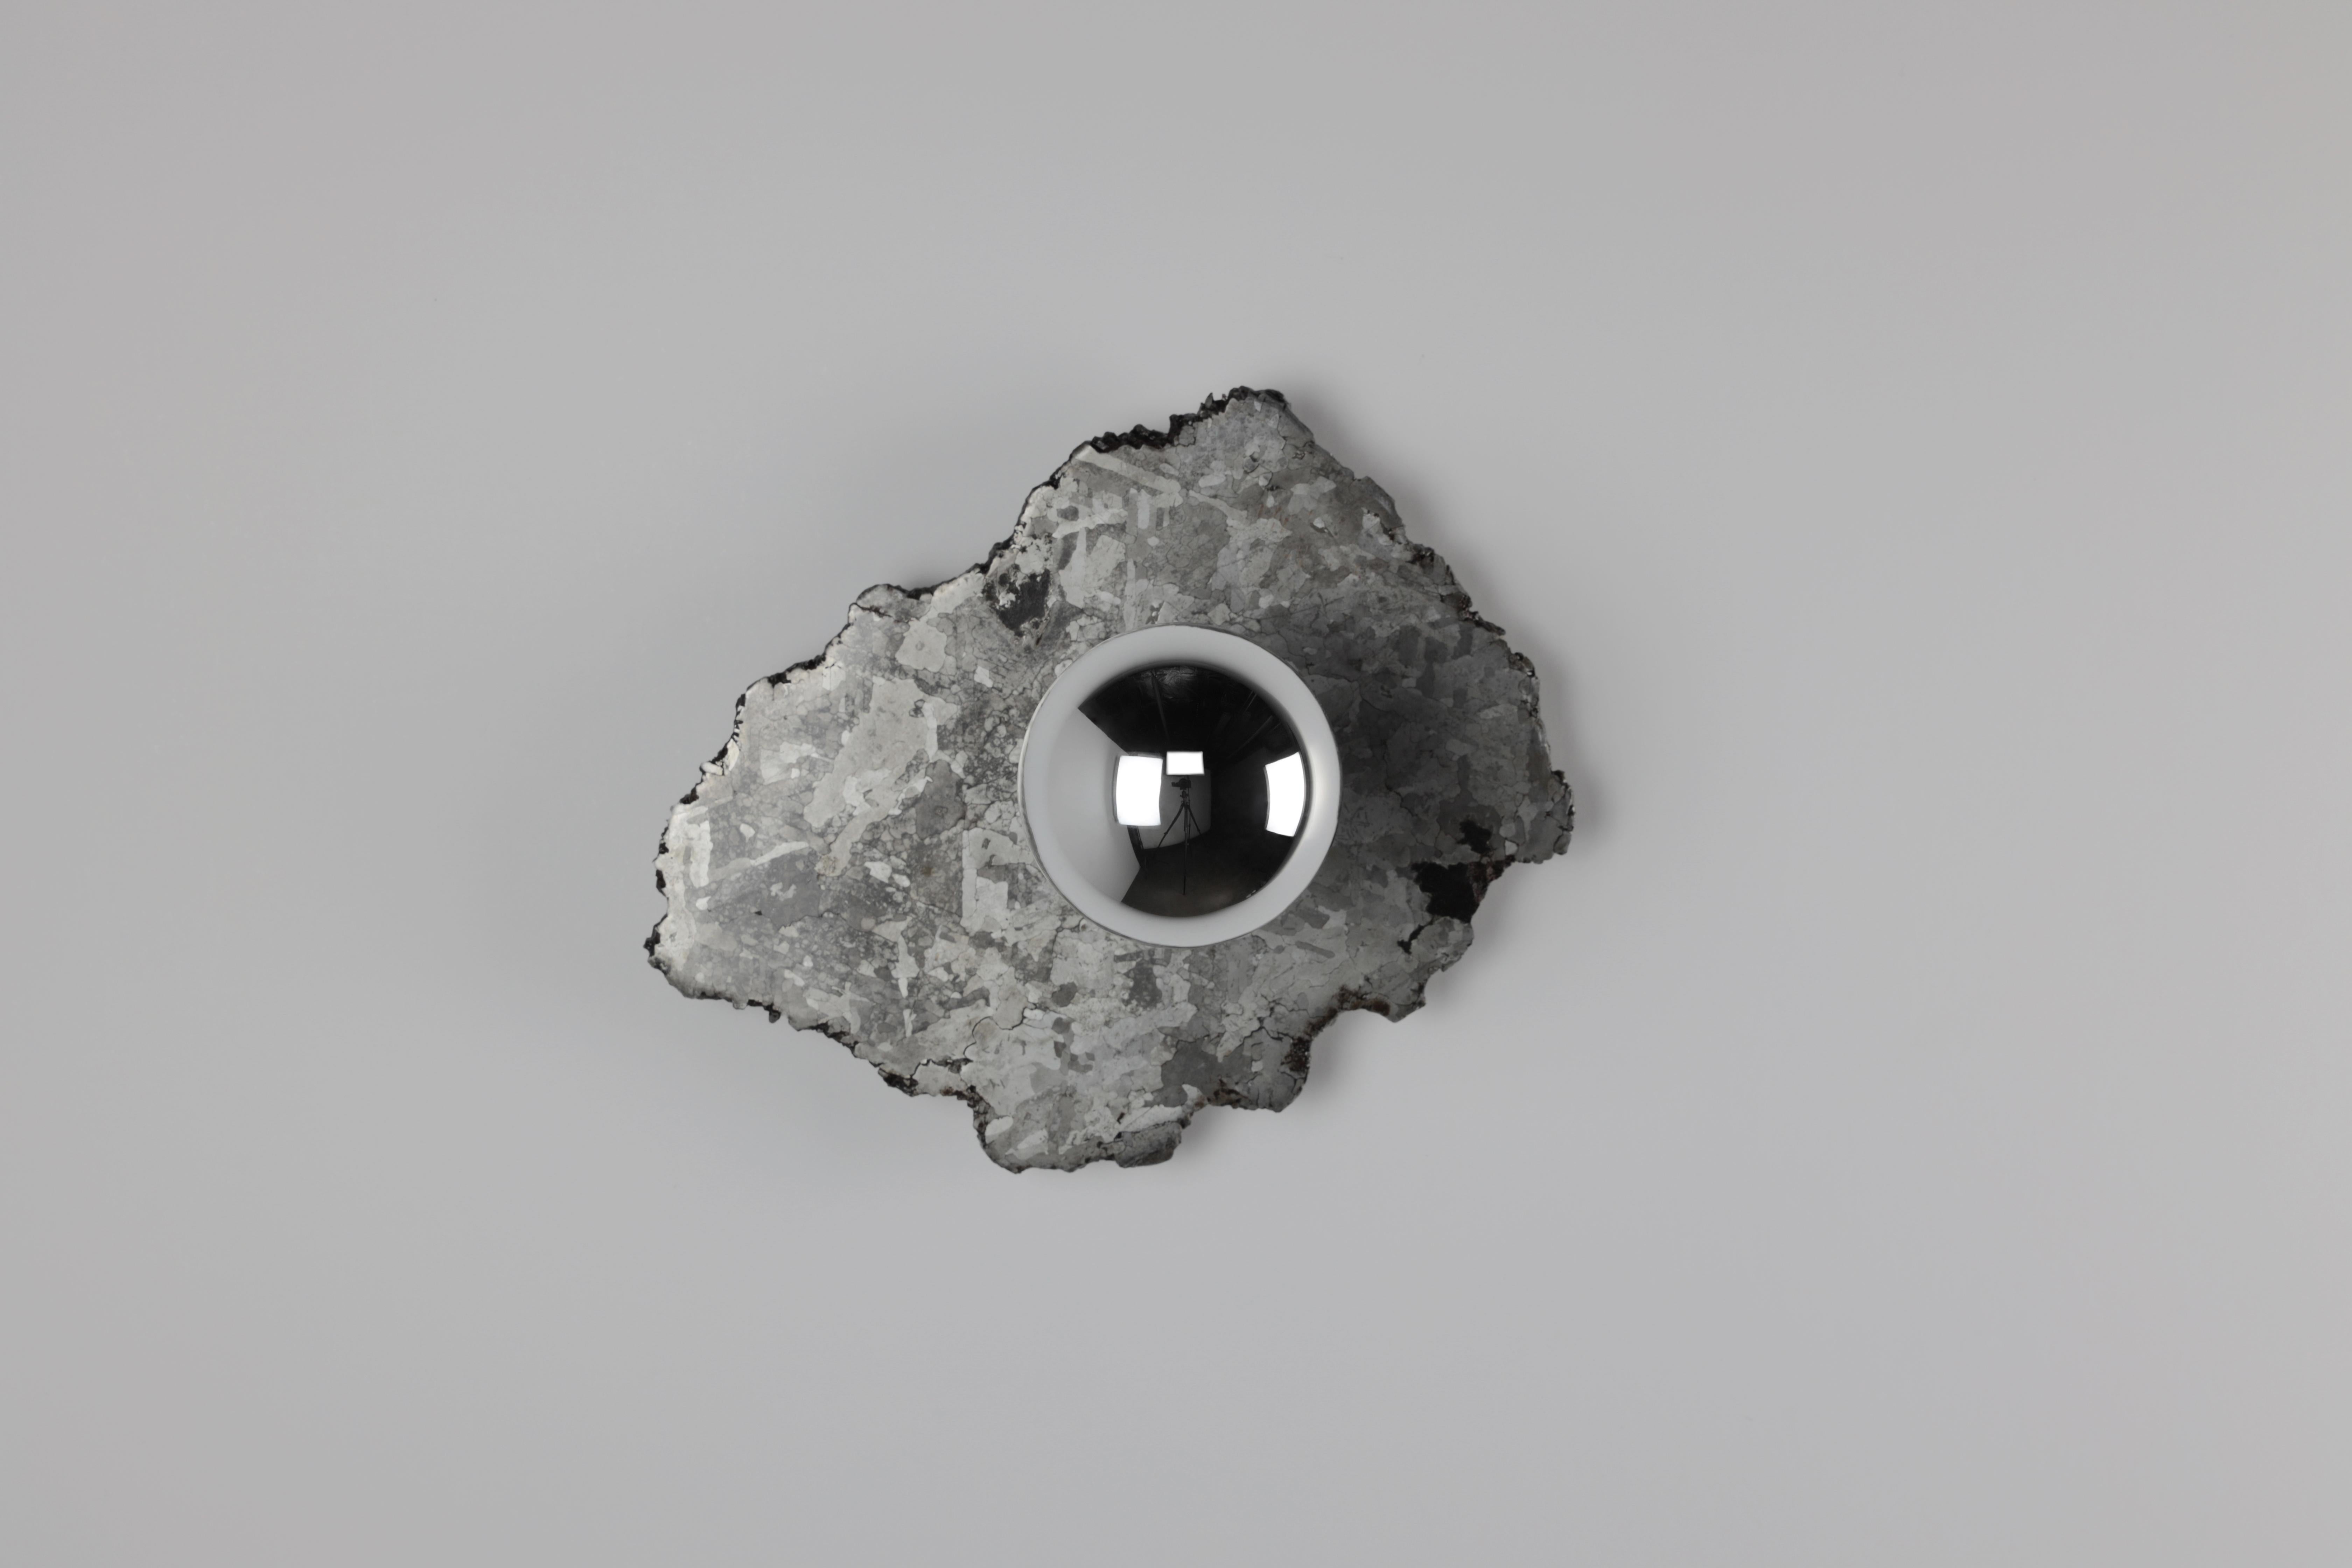 Organic Modern Meteorite Sconce 'A' with Half Chromed Bulbs, 2021 by Christopher Kreiling